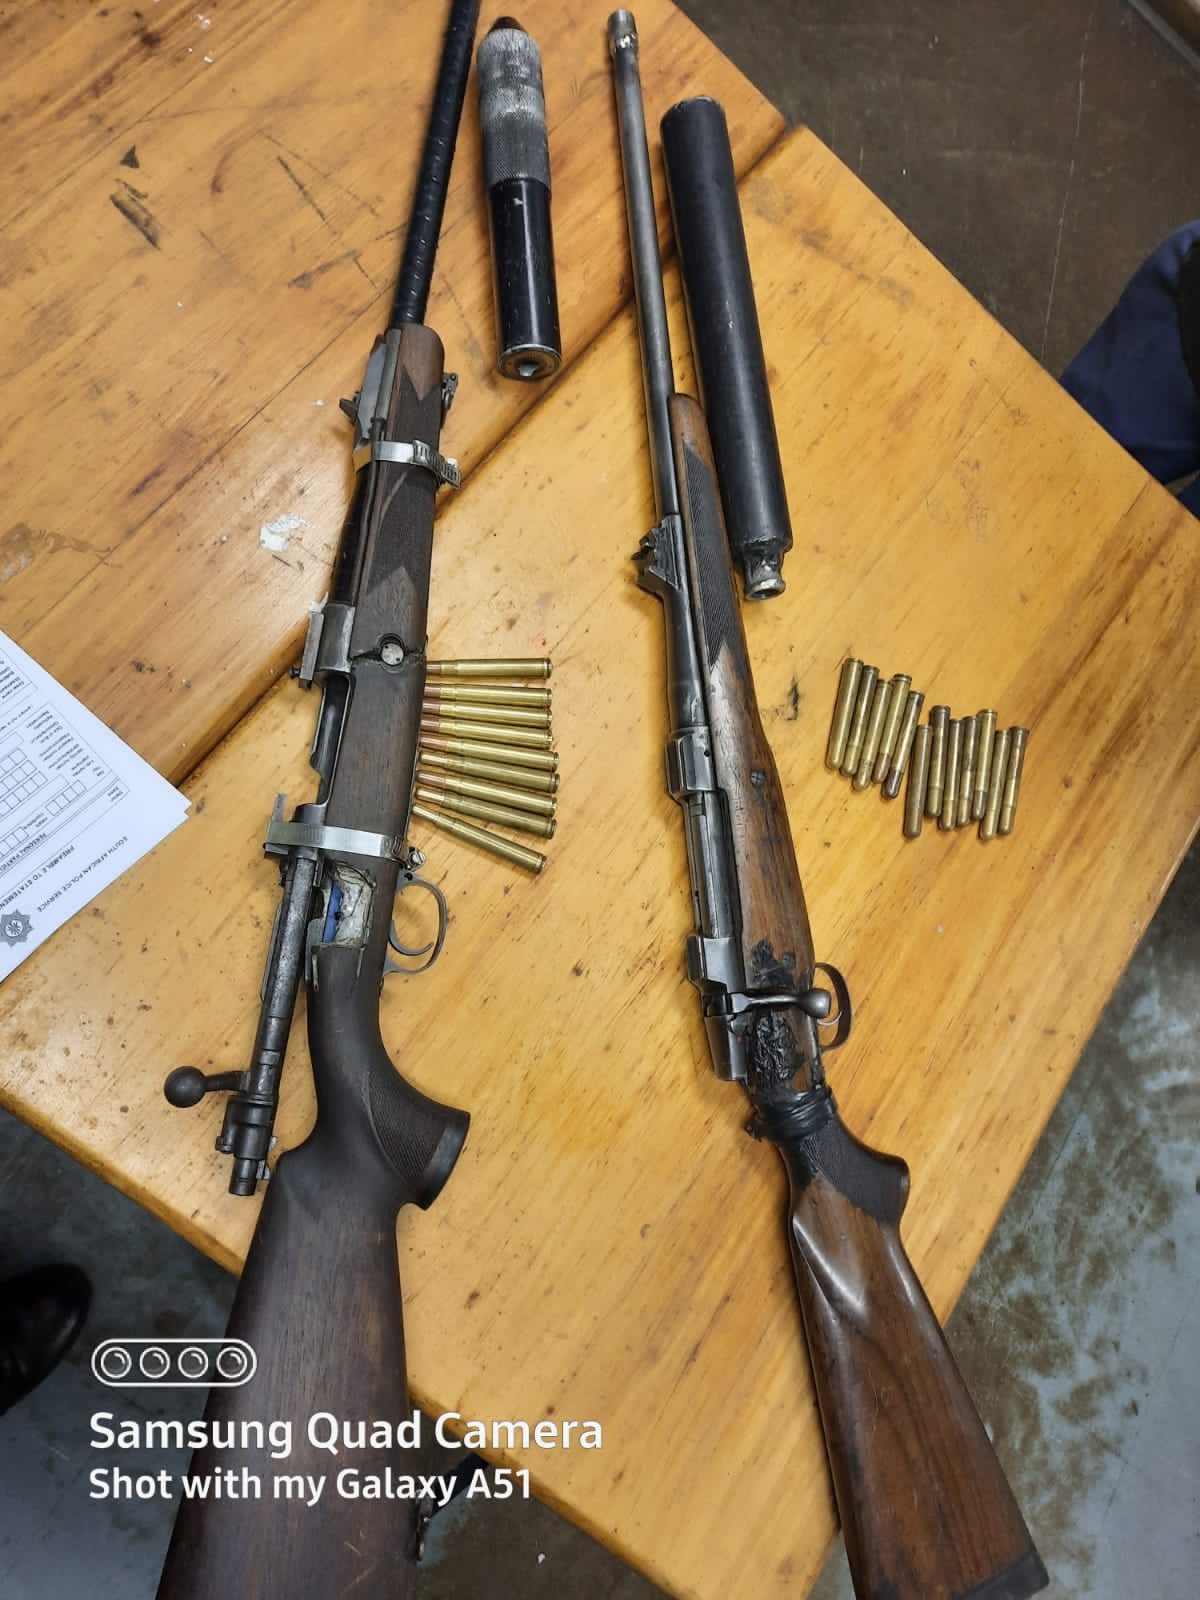 Seven firearms recovered, suspects behind bars